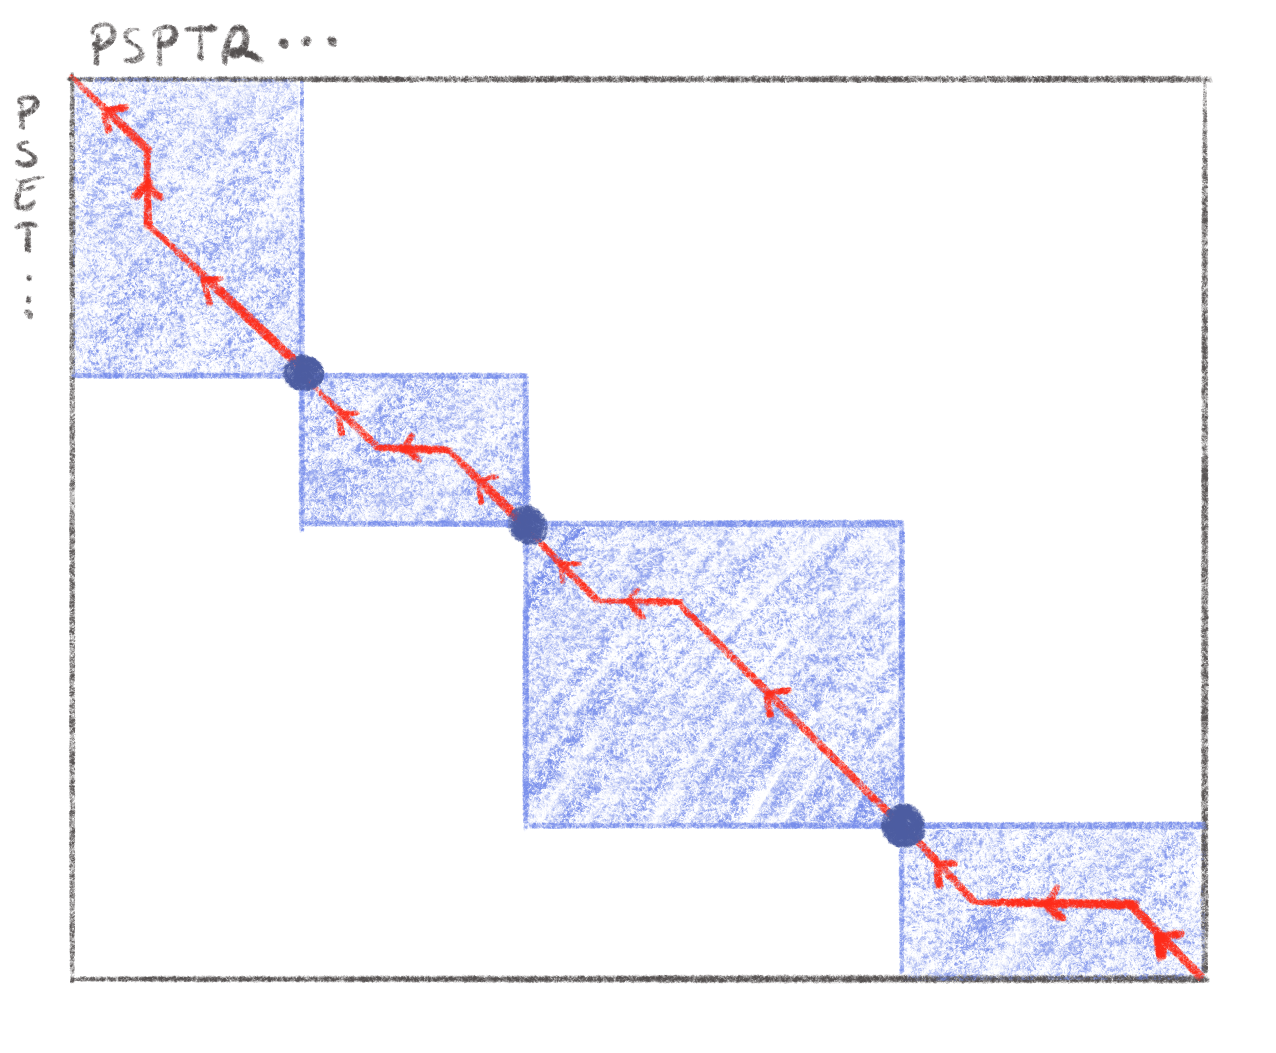 **Divide and conquer to speed up alignment.**  
Here anchors are used to speed up alignment. Anchors are shown as dark blue dots in the dynamic programing matrix. Only values in blocks between anchors, shown in blue, need to be computed. The majority of the matrix can be left empty. The optimal path in the resulting alignment graph must go through each anchor and is shown in red.
Adapted from [@chaoDevelopmentsAlgorithmsSequence2022].